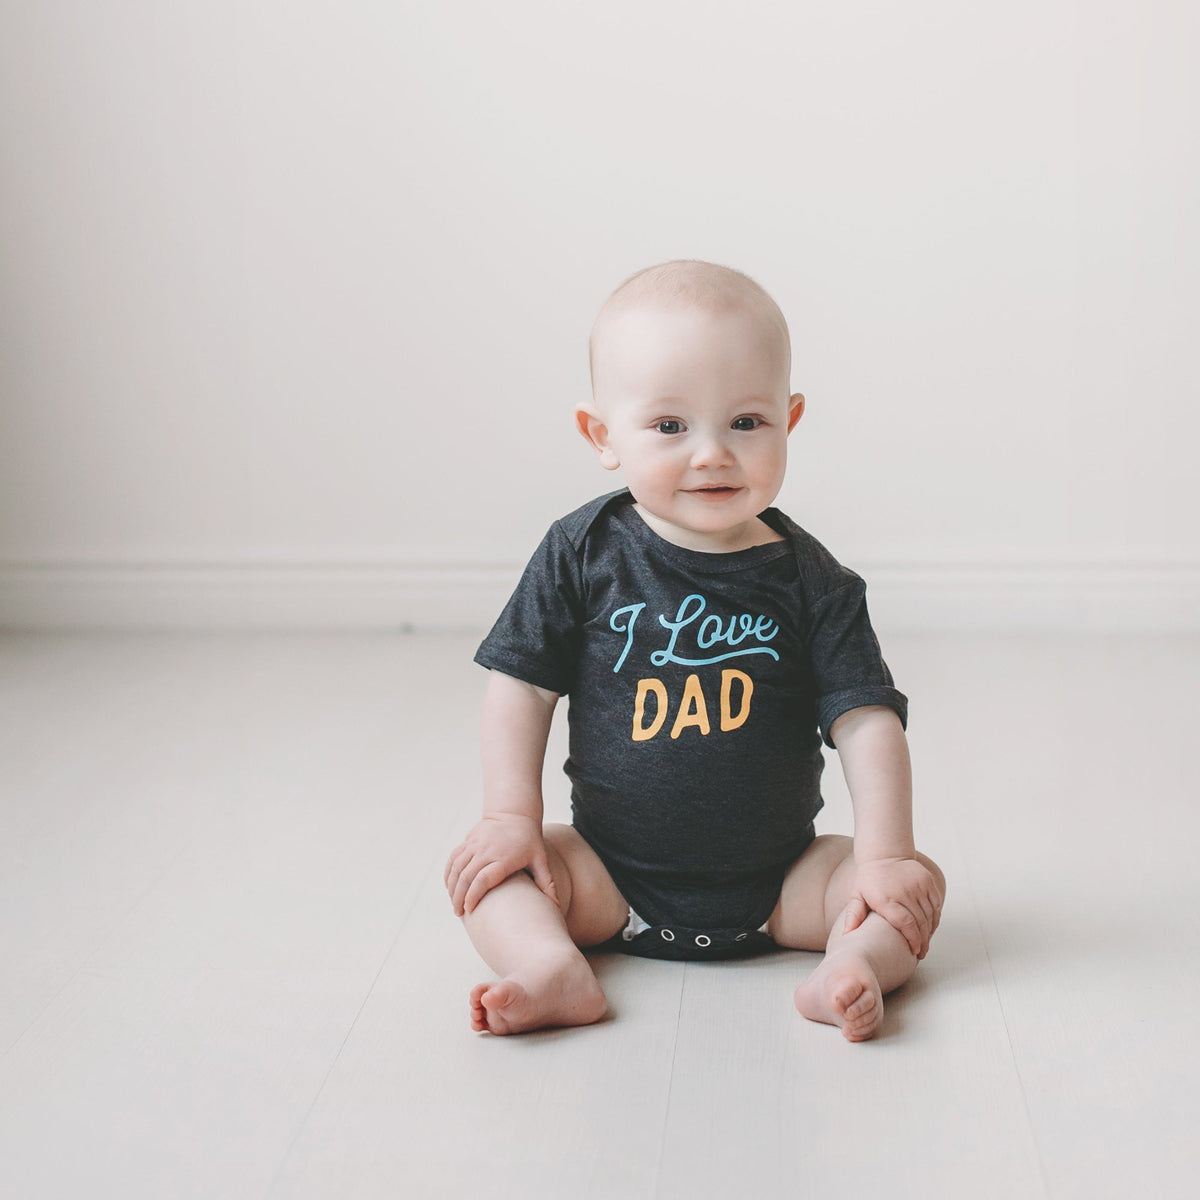 I Love Dad baby bodysuit - Sweetpea and Co.